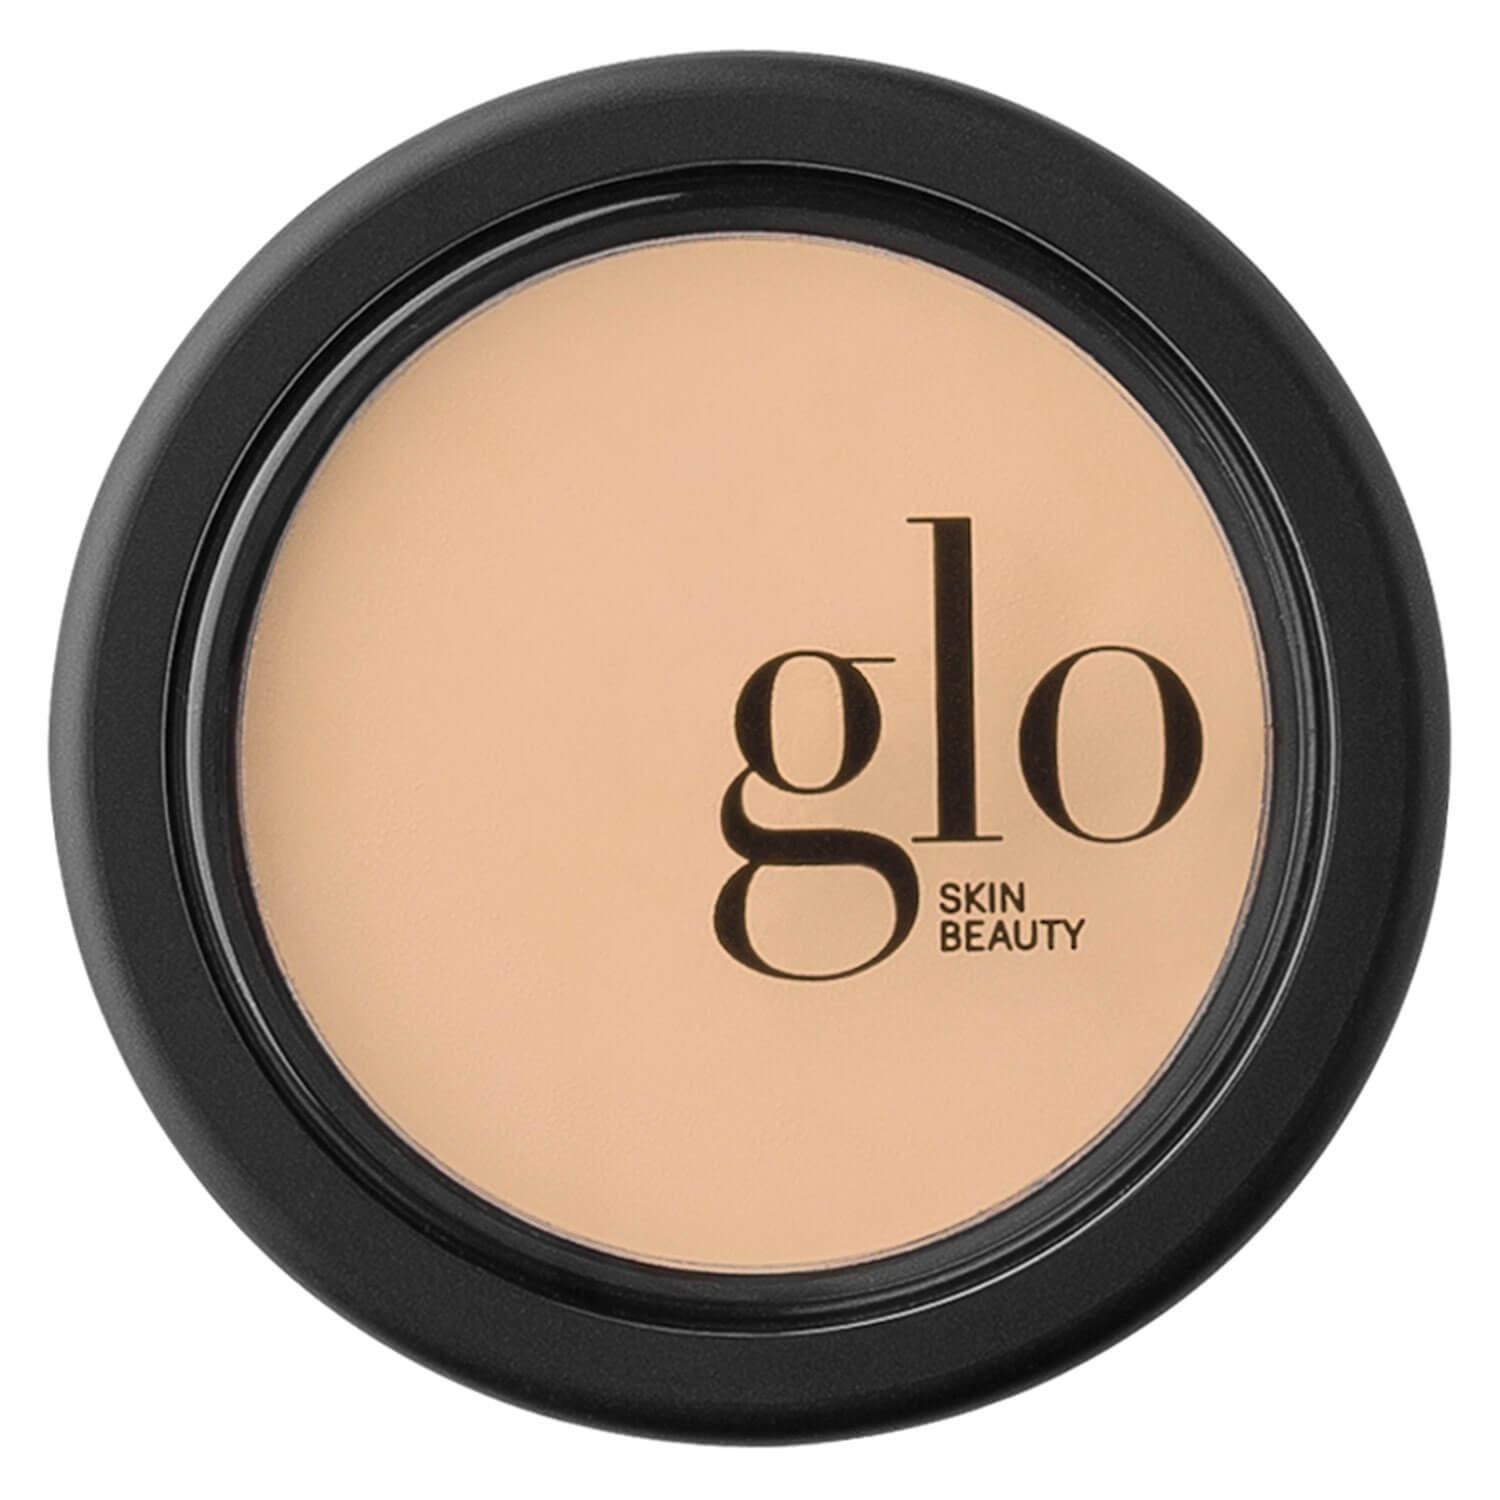 Glo Skin Beauty Camouflage - Oil Free Camouflage Sand